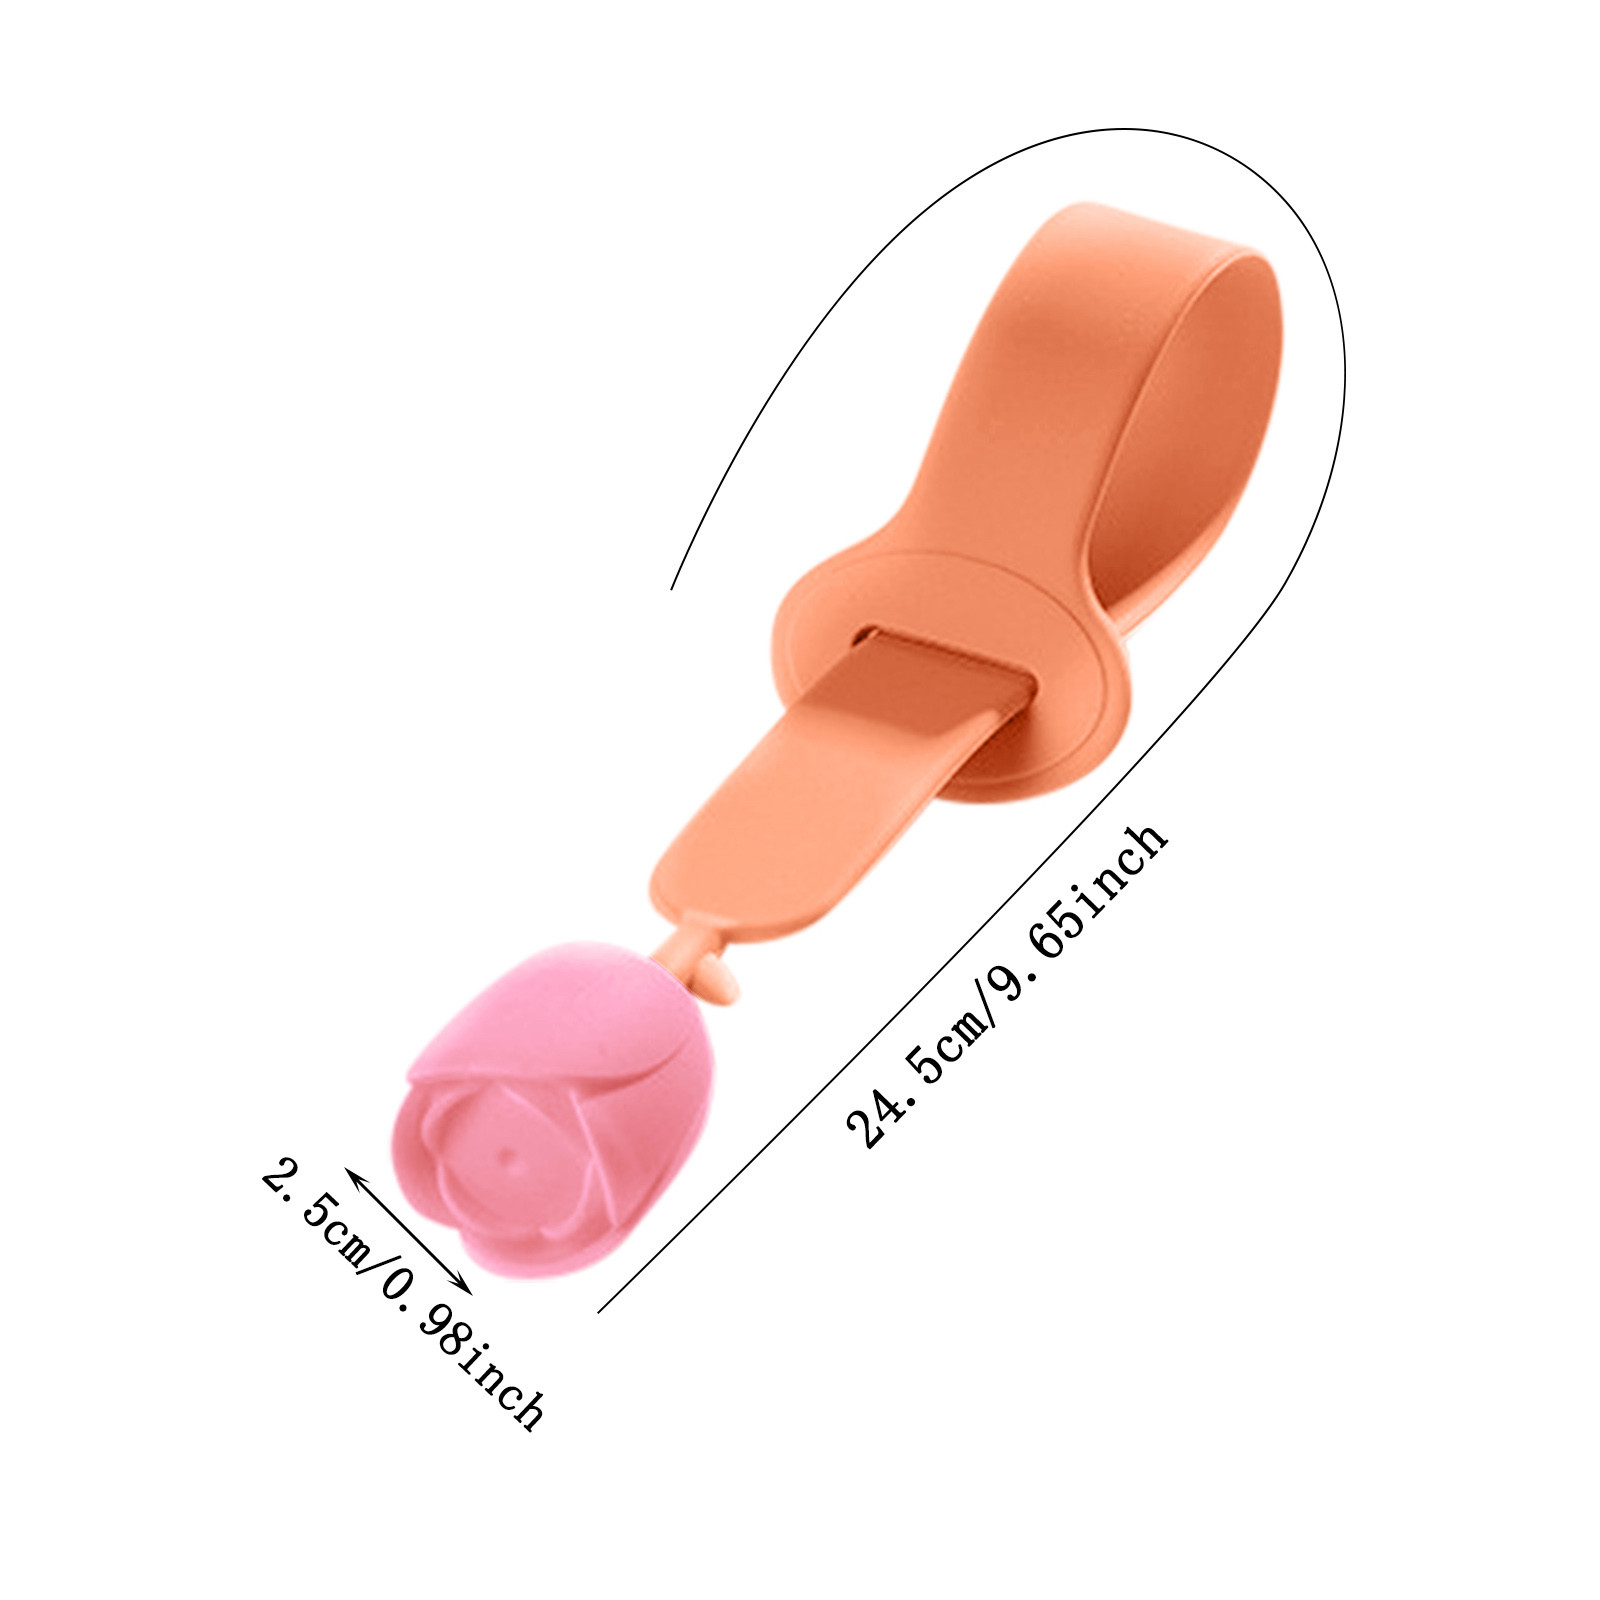 Toilet Seat Lifter Handle Toilet Seat Lid Lifter Handle Toilet Seat Cover Lifting Handle Flower Flexible Kids Toilet Seat Lifter Contact with The Toilet Ring - image 2 of 3